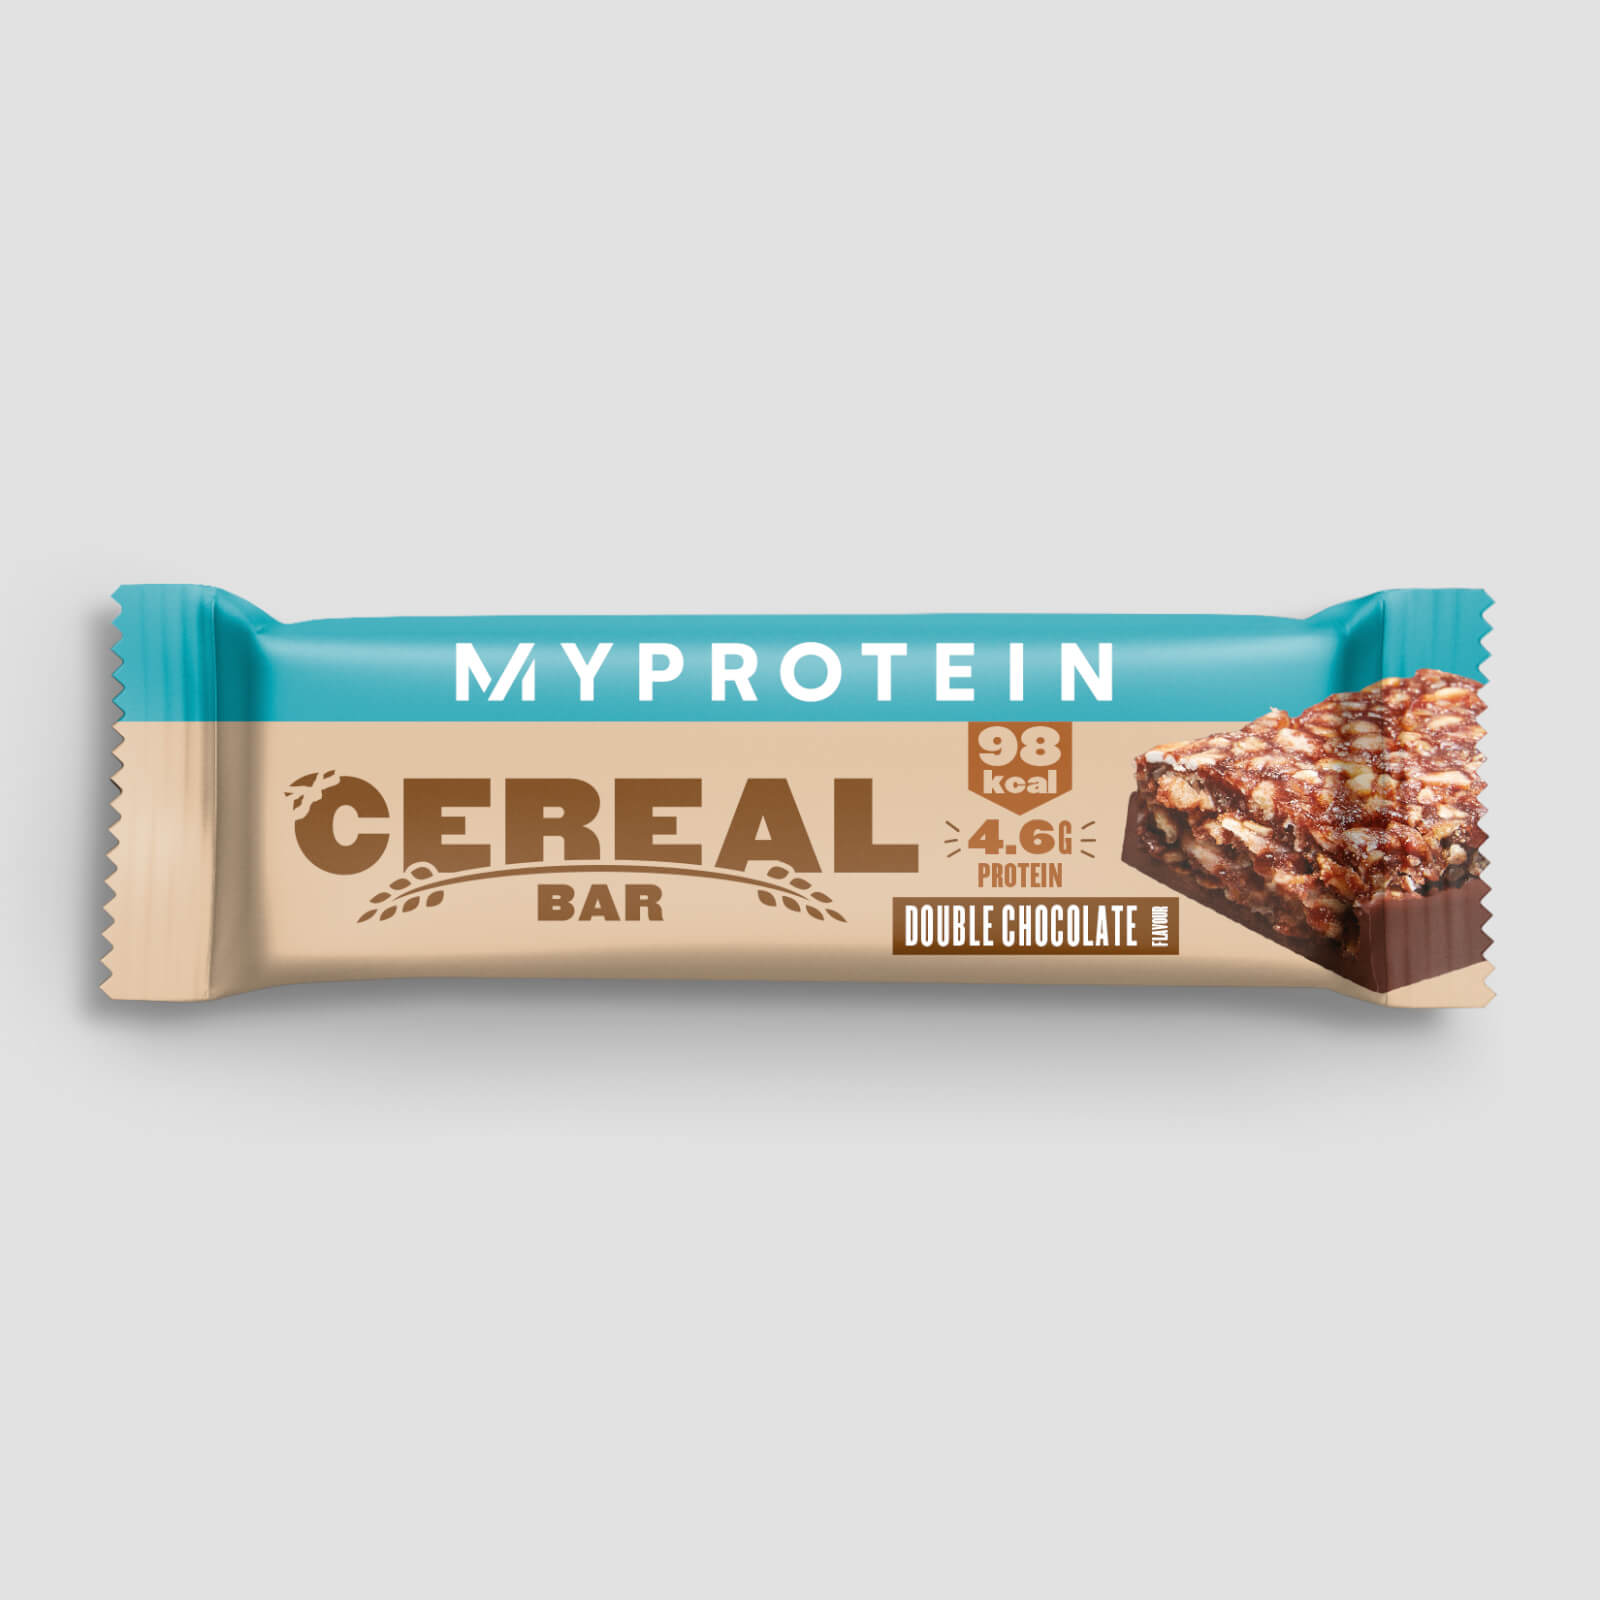 Myprotein Cereal Bar - 30g - Double Chocolate